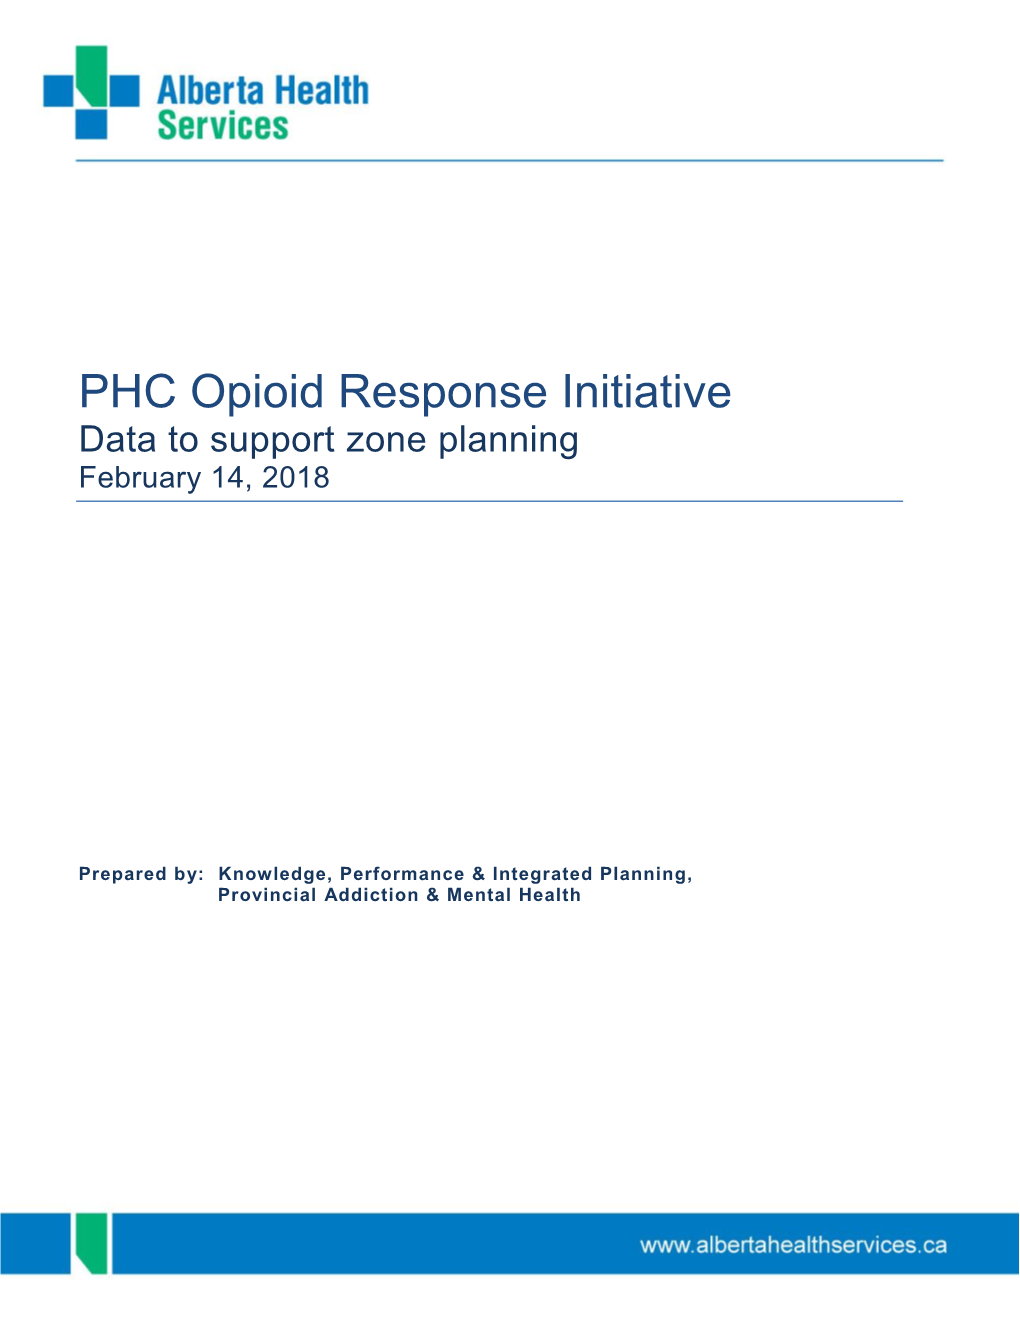 PHC Opioid Response Initiative Data to Support Zone Planning February 14, 2018